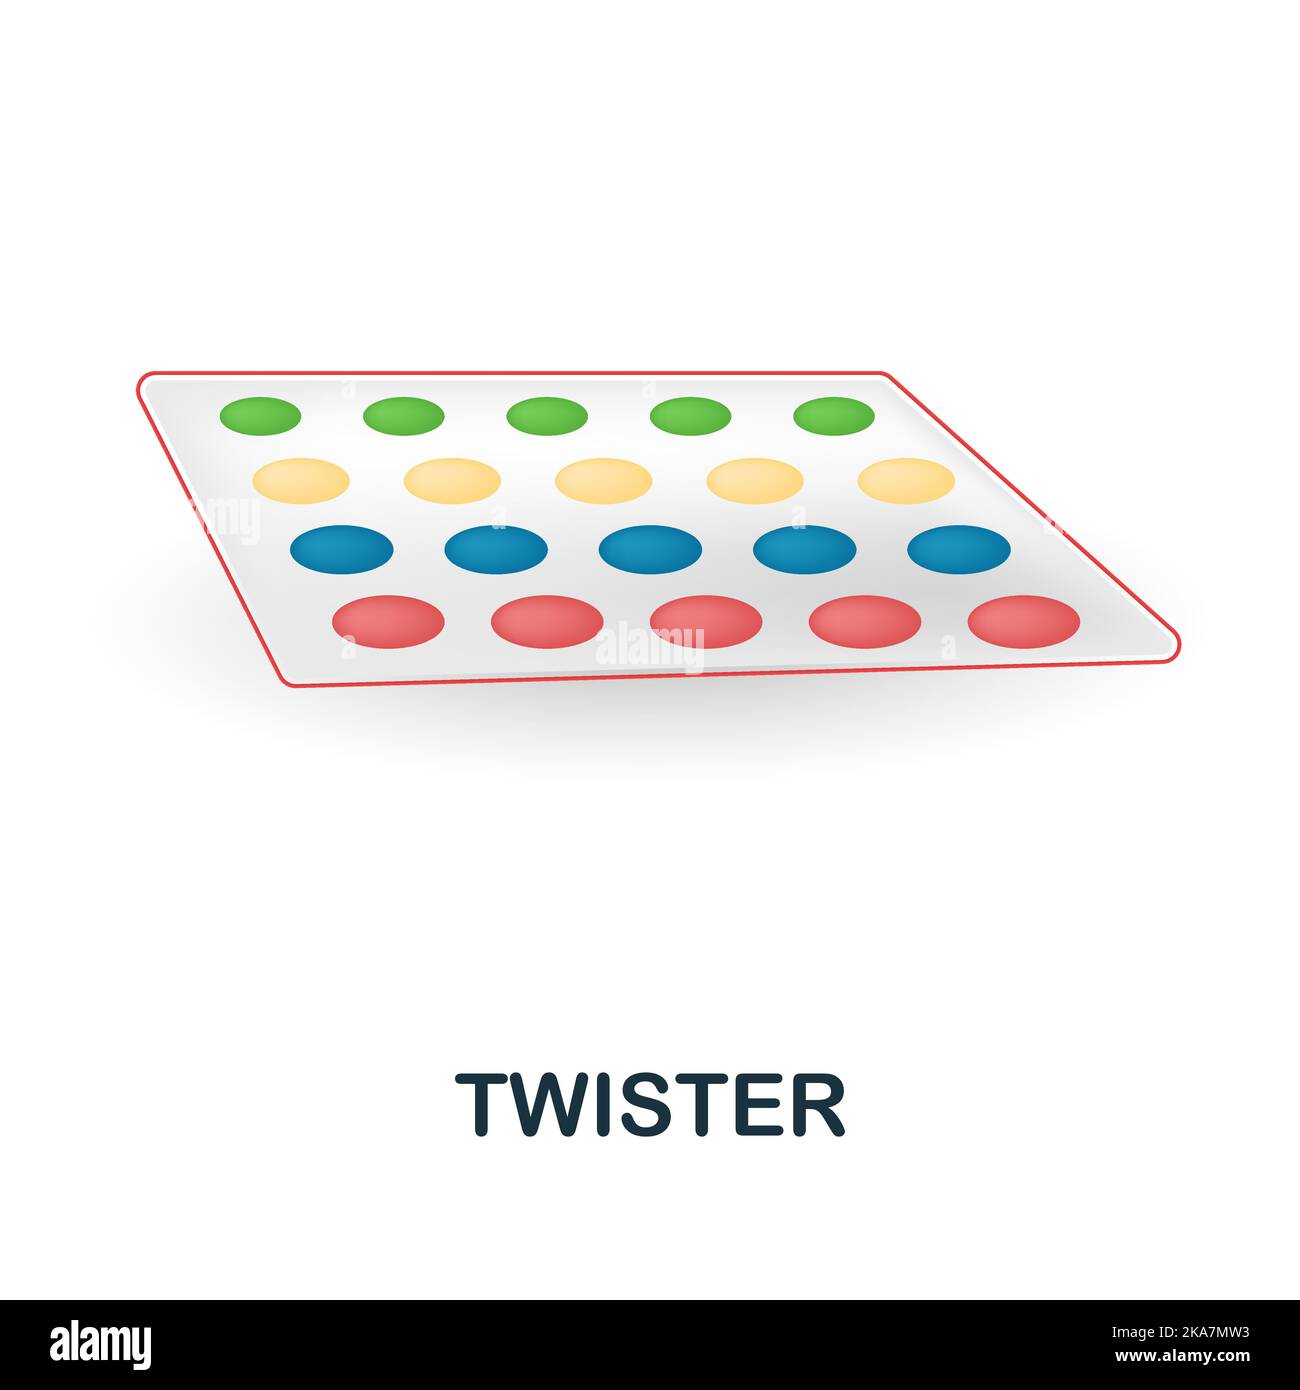 37,561 Twister Images, Stock Photos, 3D objects, & Vectors